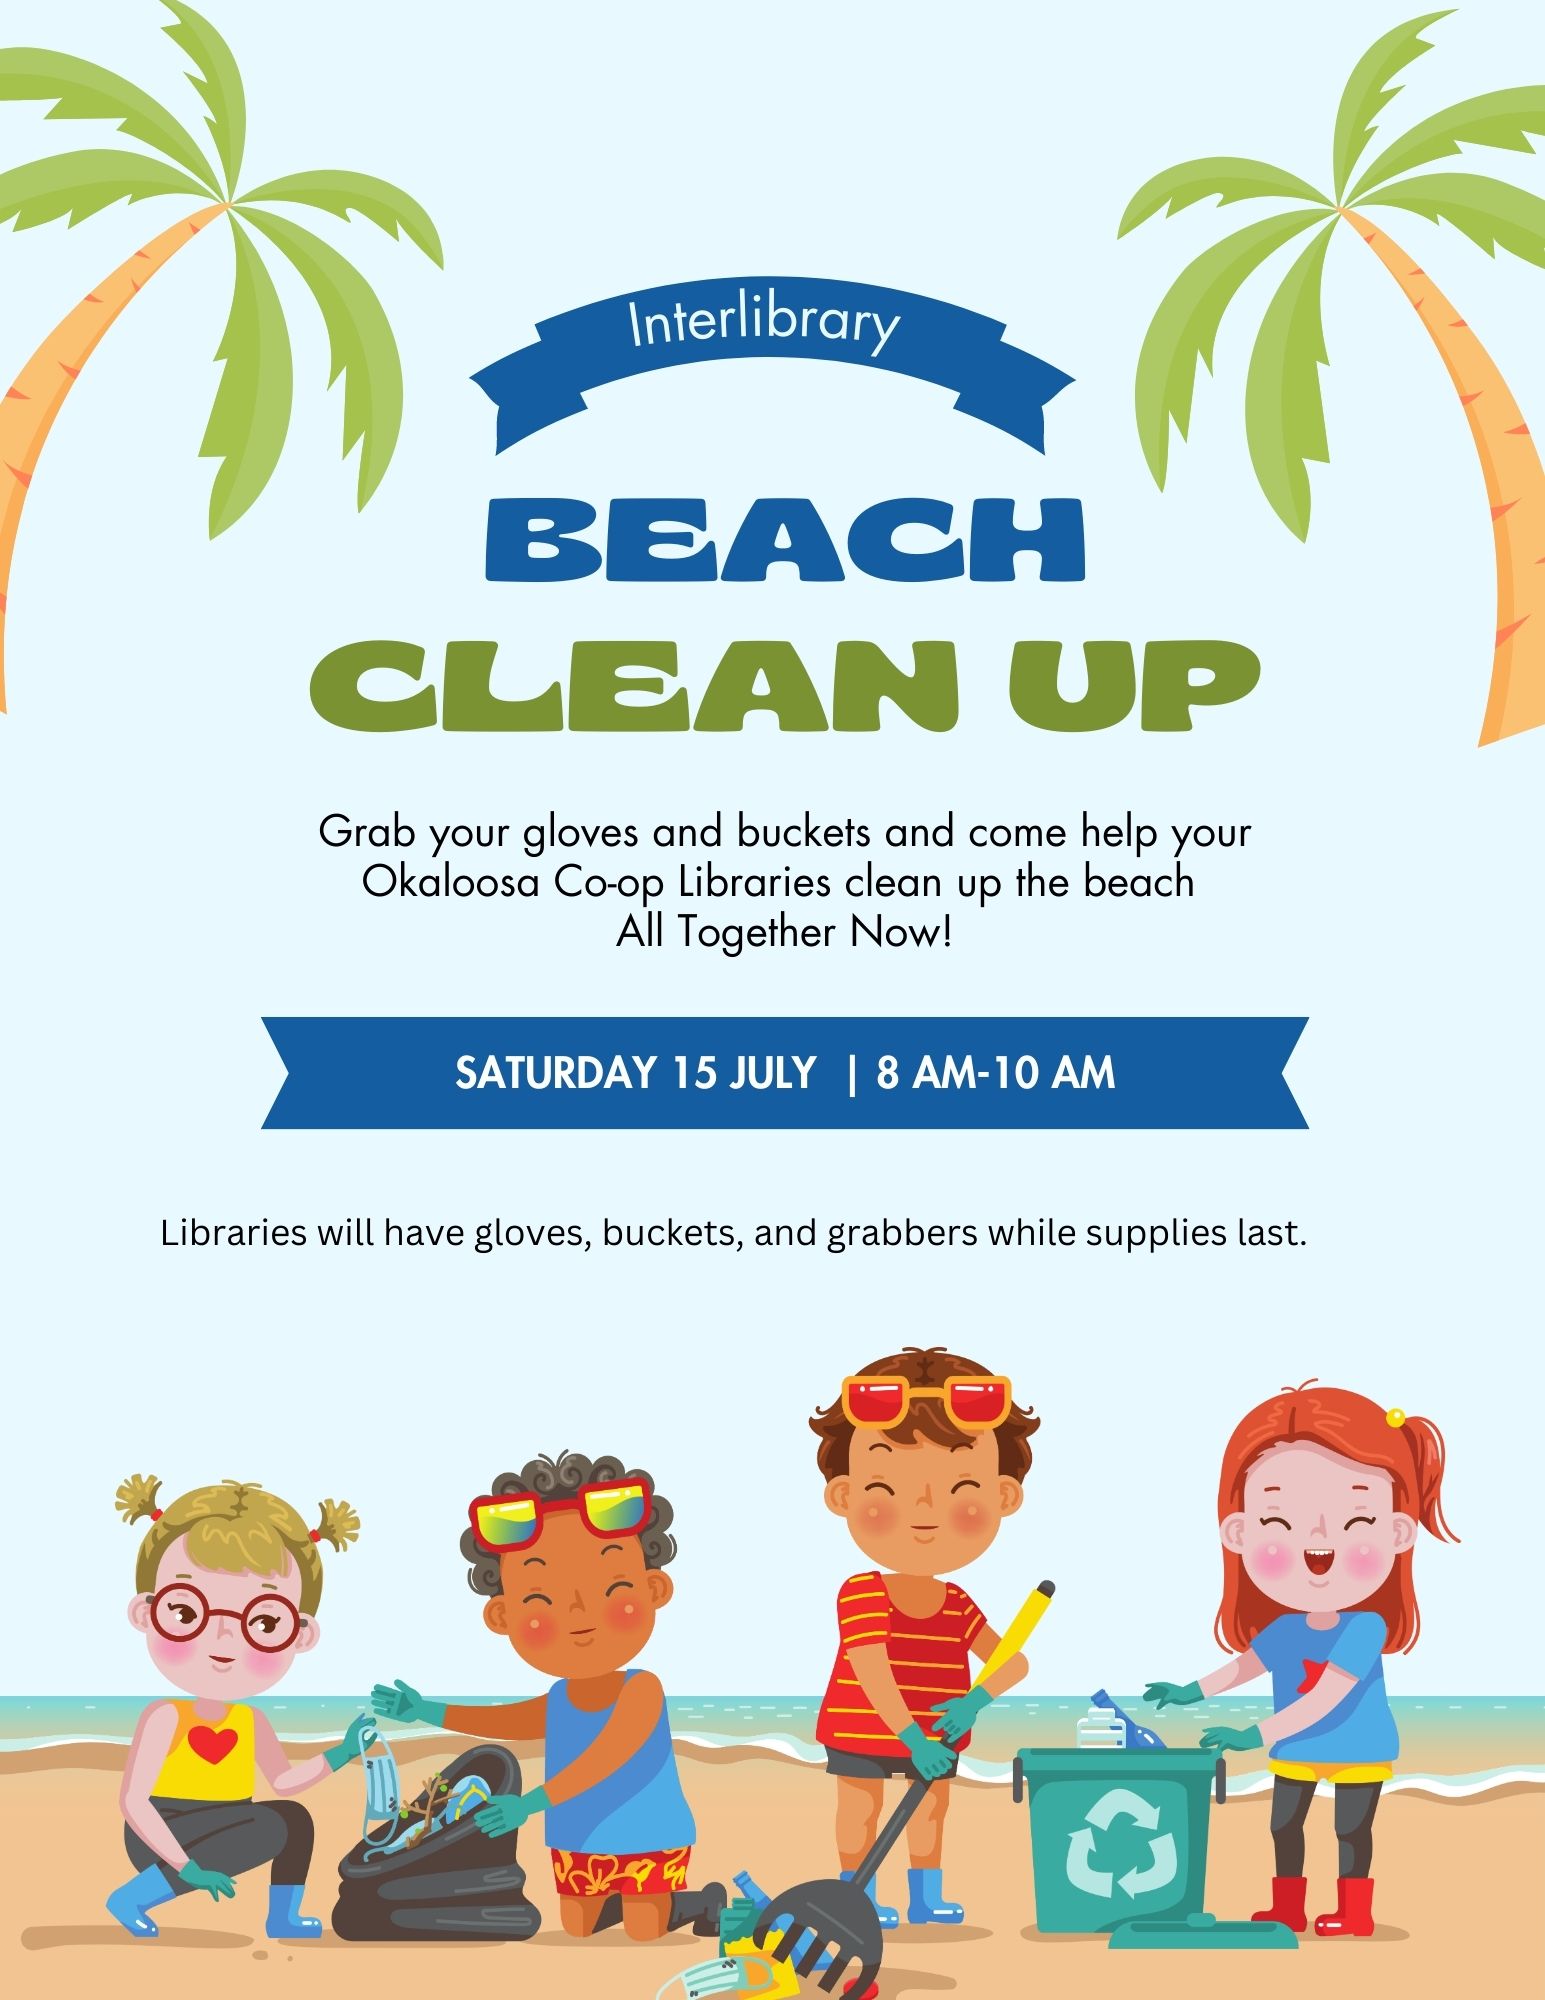 children cleaning the beach with palm trees and a banner that says interlibrary beach clean up